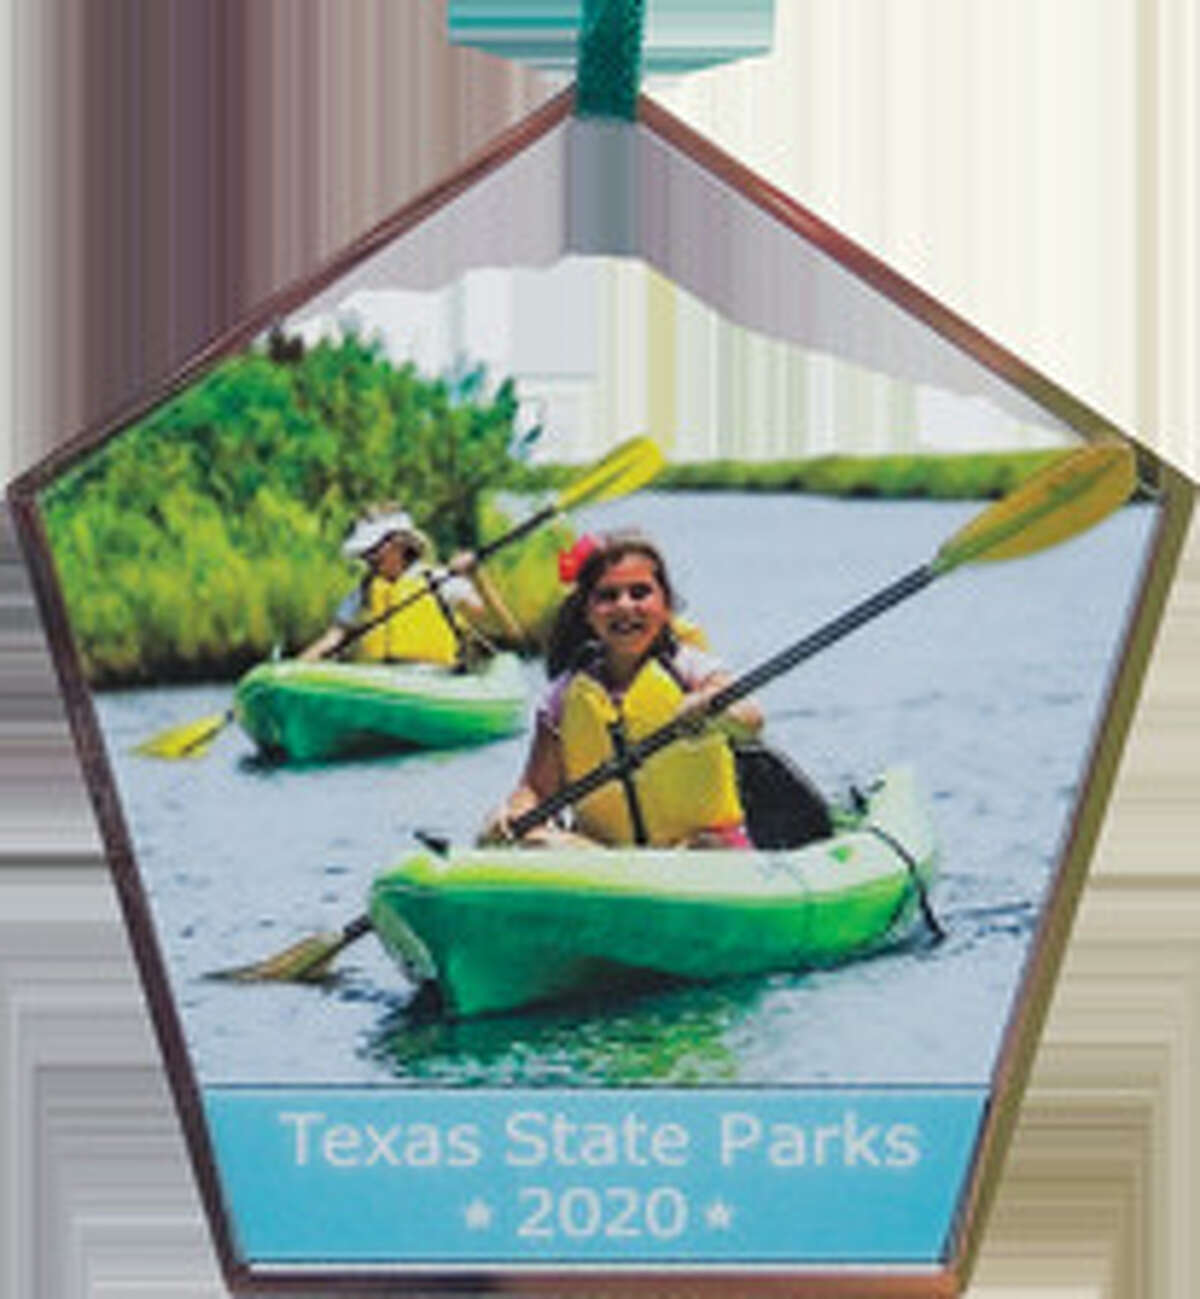 This year's Texas State Parks Christmas ornament features kayaking at Sea Rim State Park. Courtesy, Texas Parks & Wildlife Department.